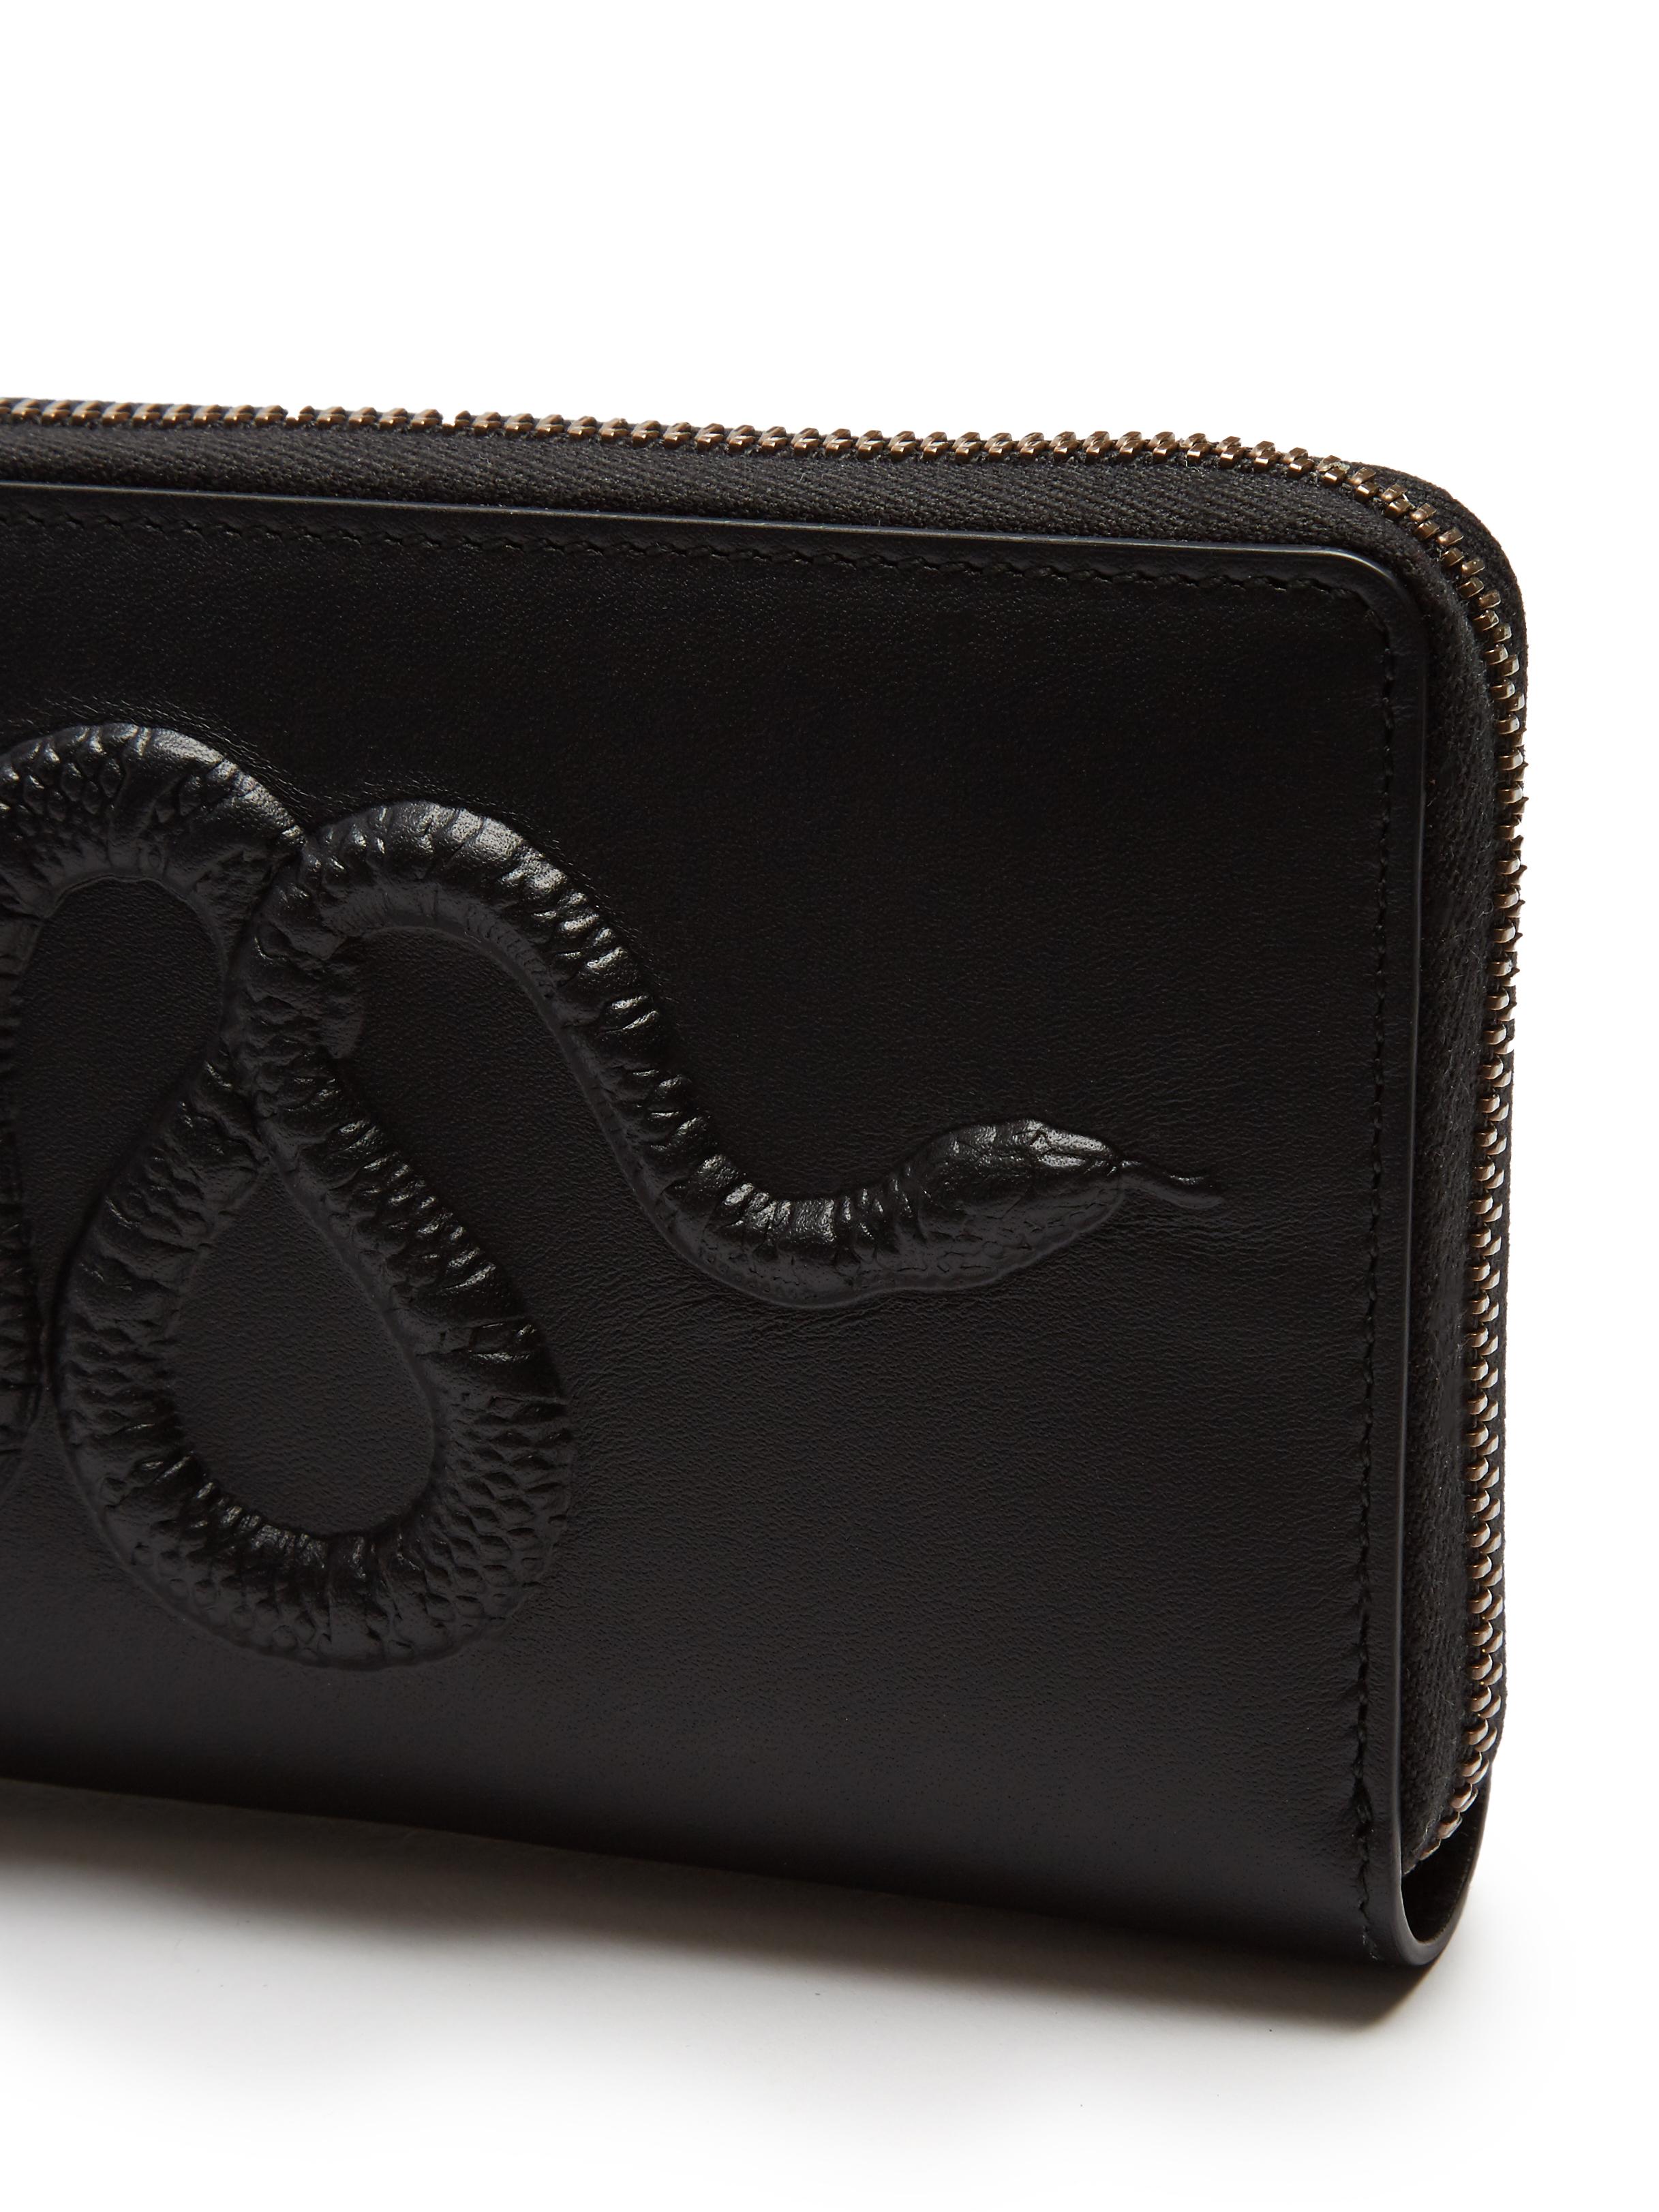 Lyst - Gucci Snake-embossed Leather Wallet in Black